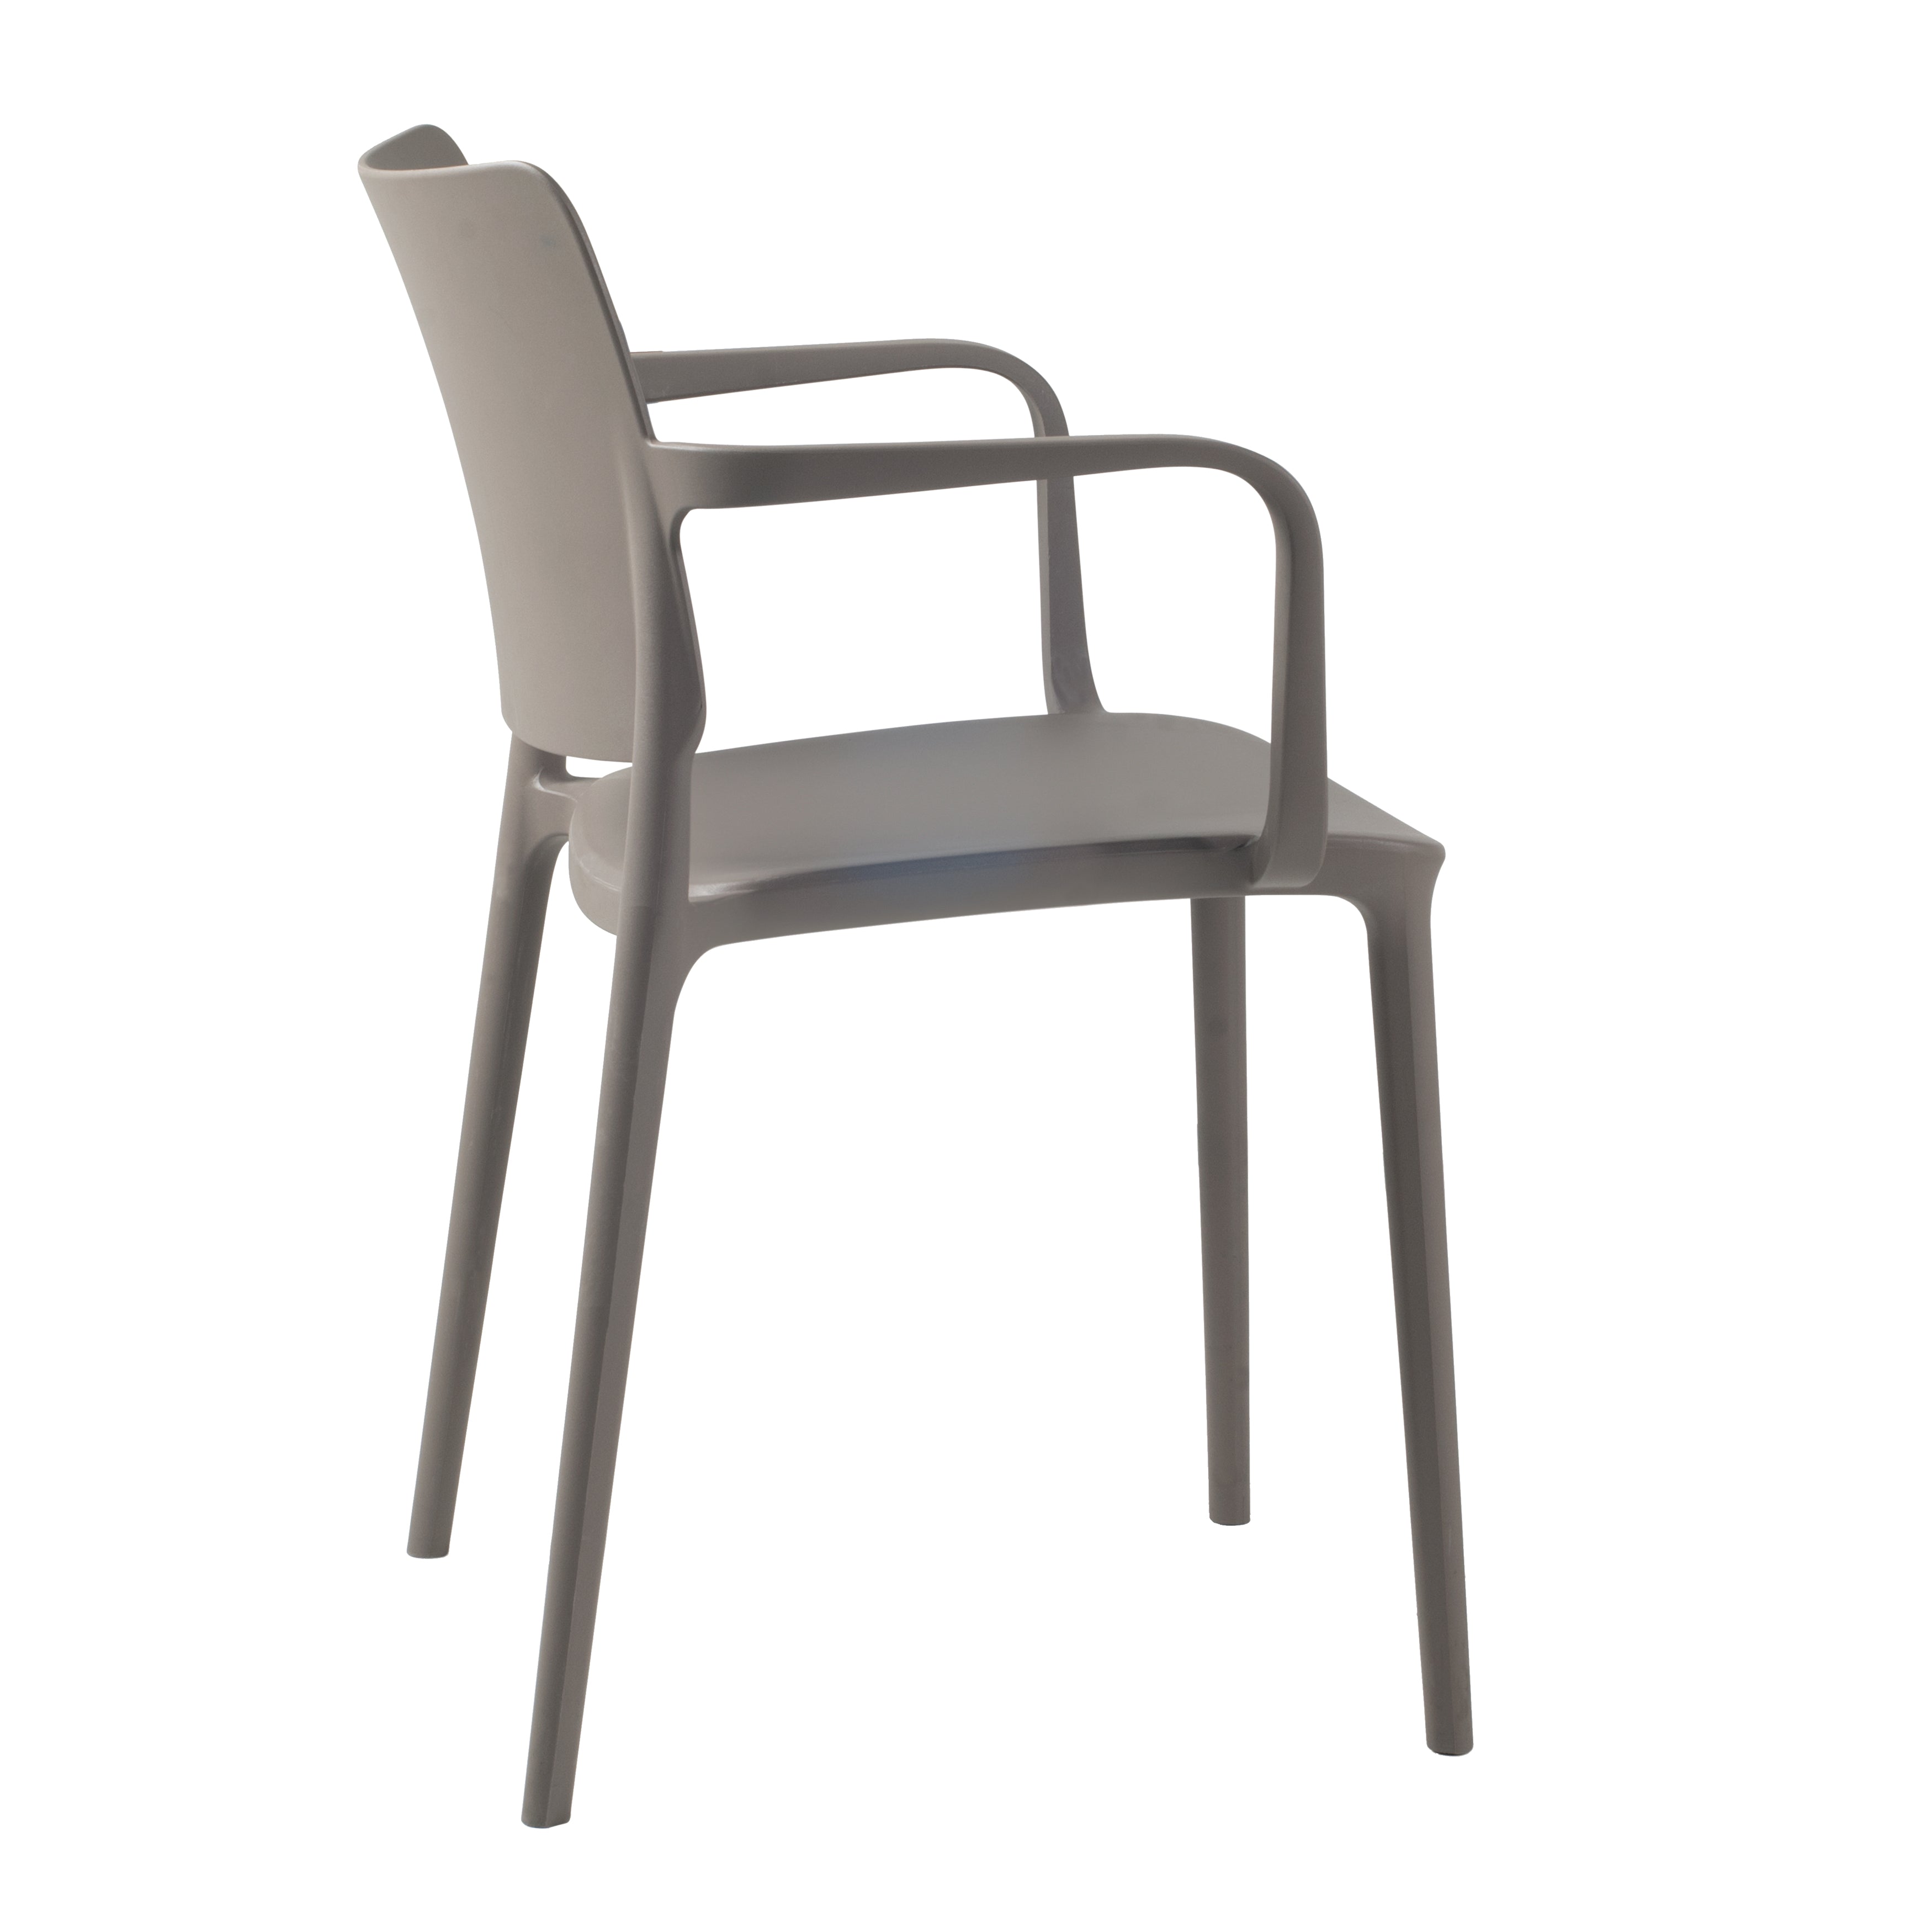 Cleo Arm Patio Dining Chair in Taupe - (Set of 2)